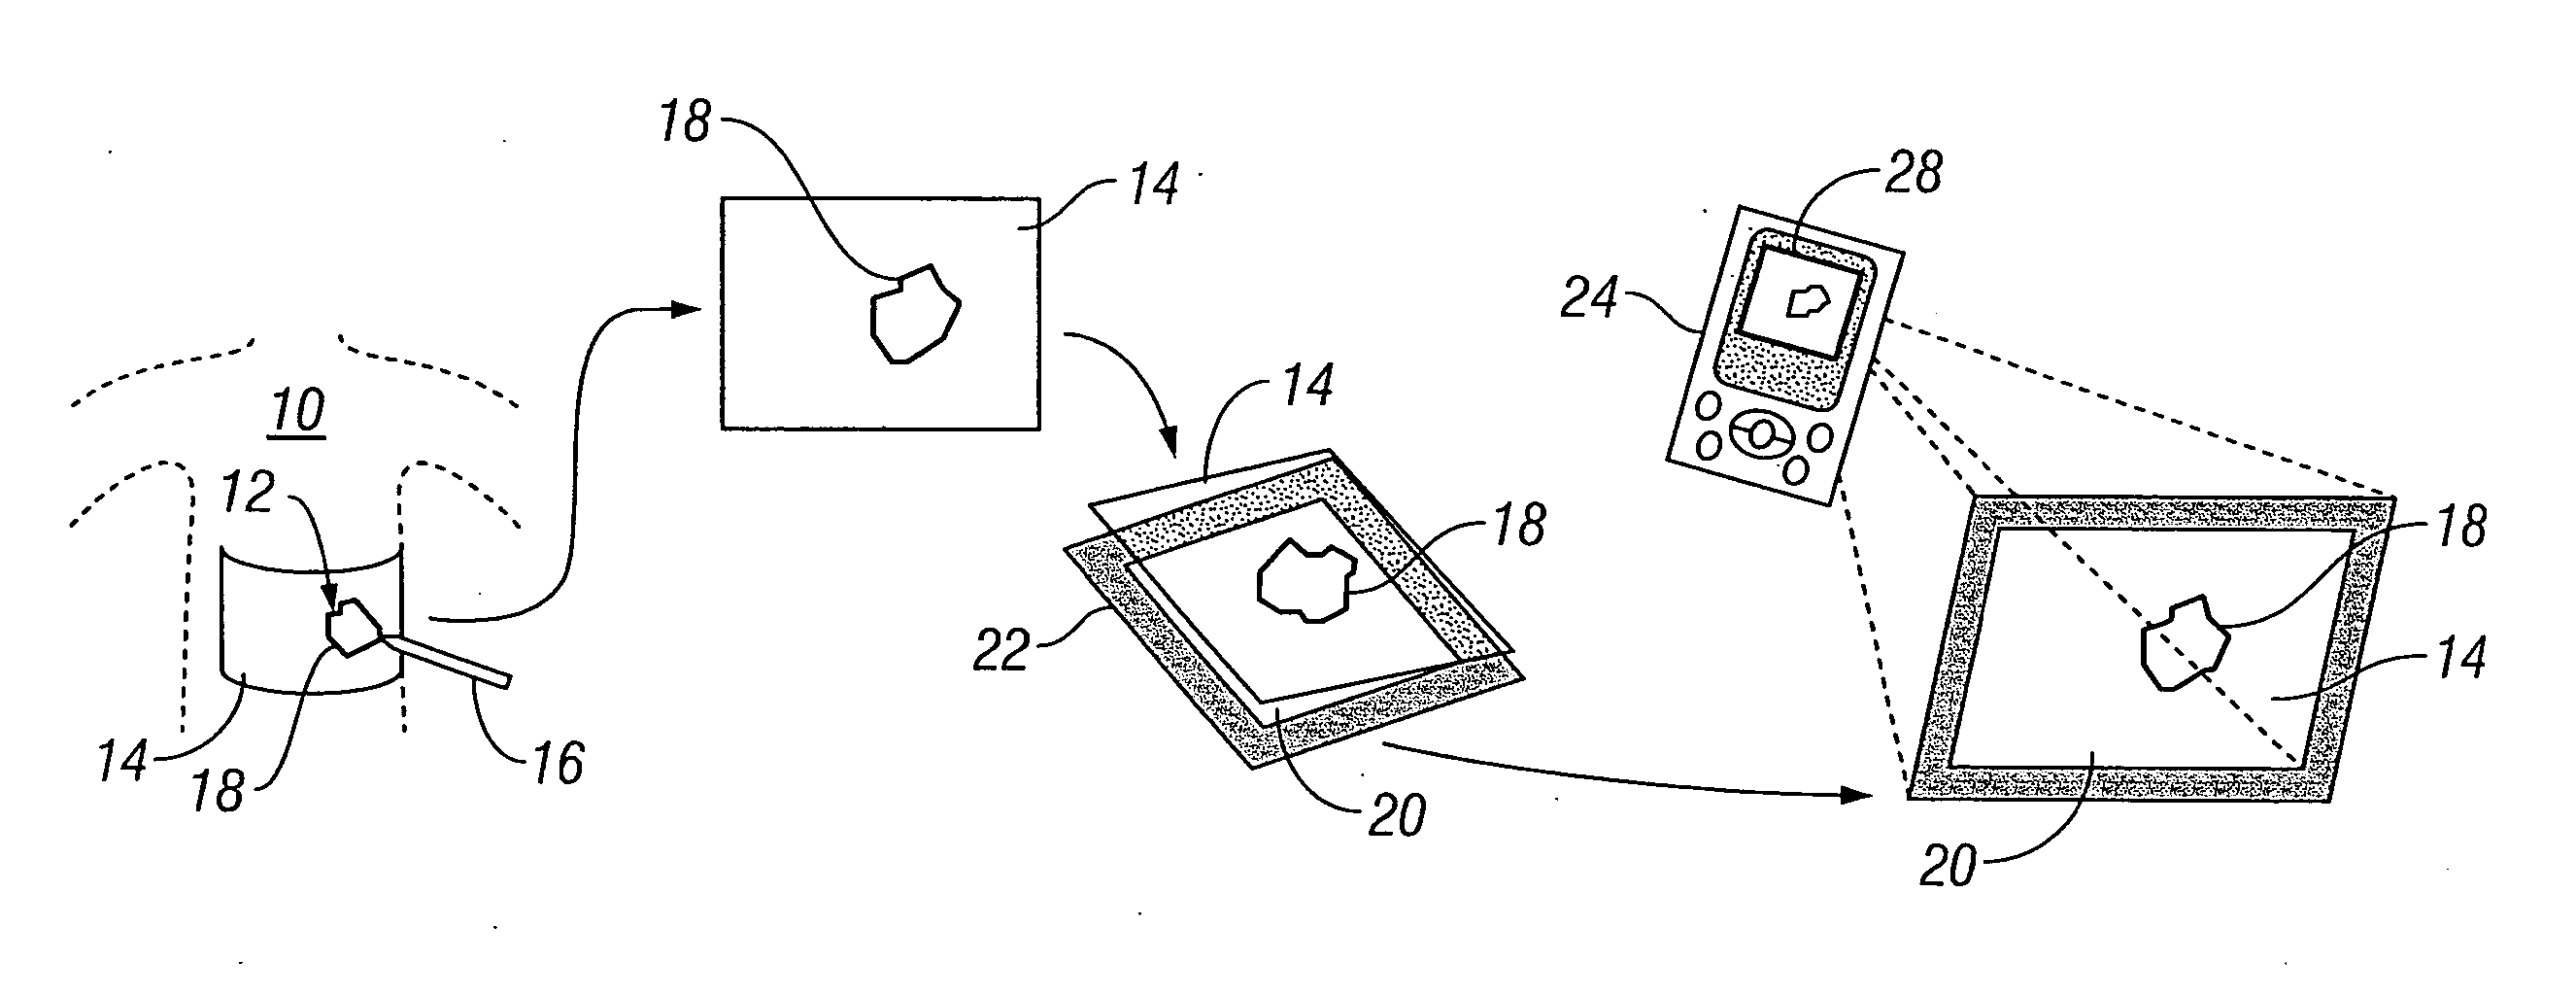 Systems and methods for wound area management